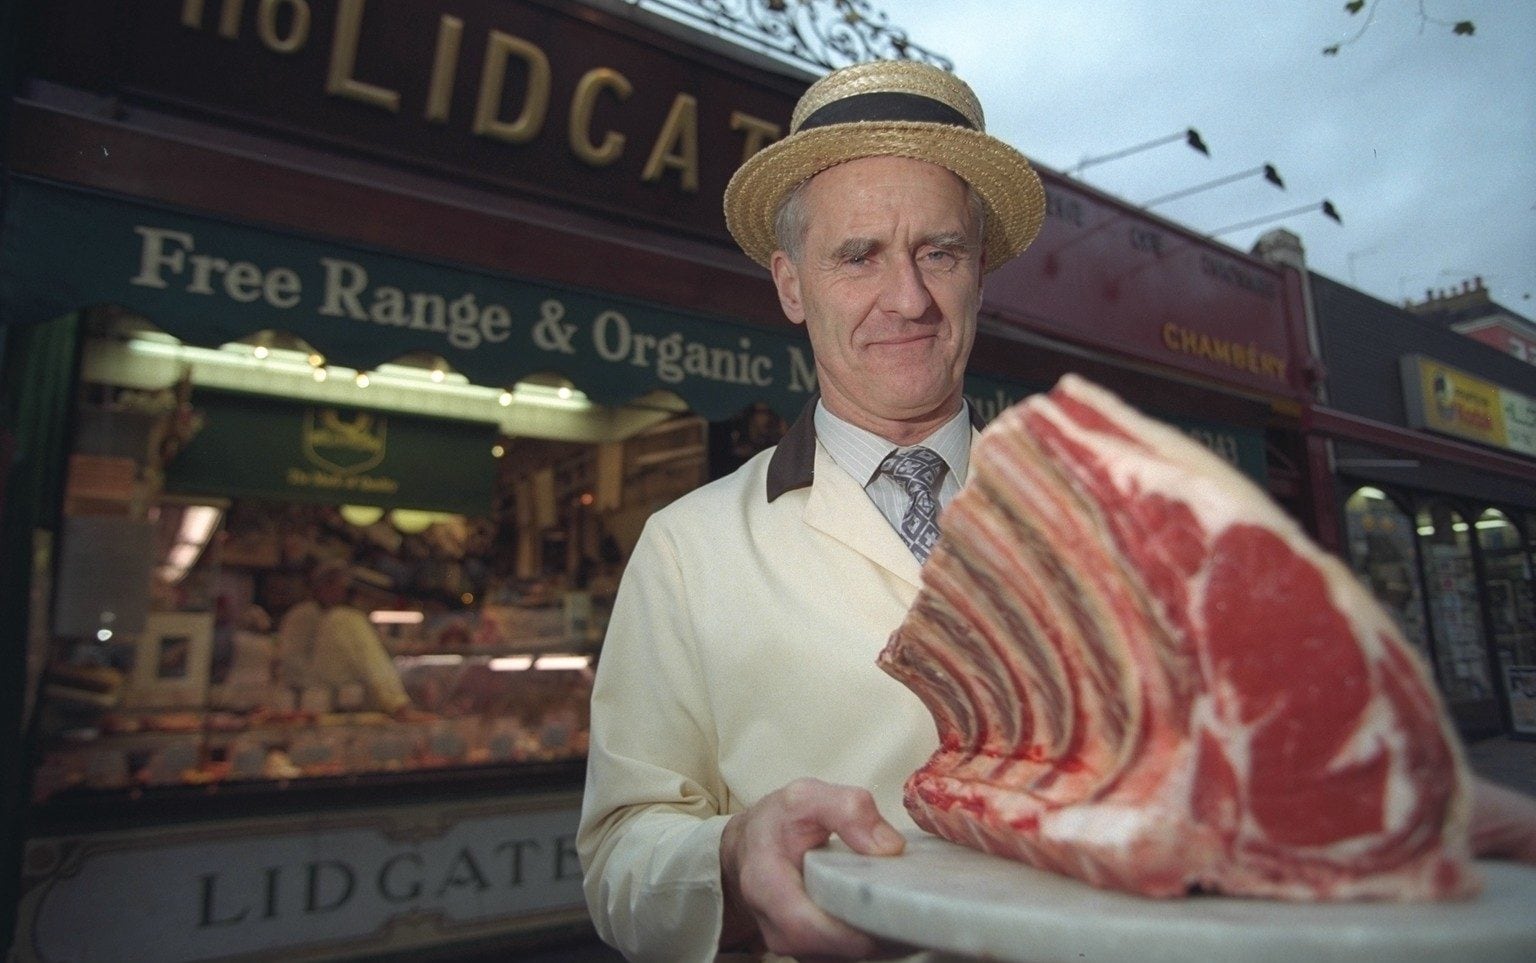 david lidgate, butcher favoured by celebrity chefs and founder of the q (for quality) guild – obituary